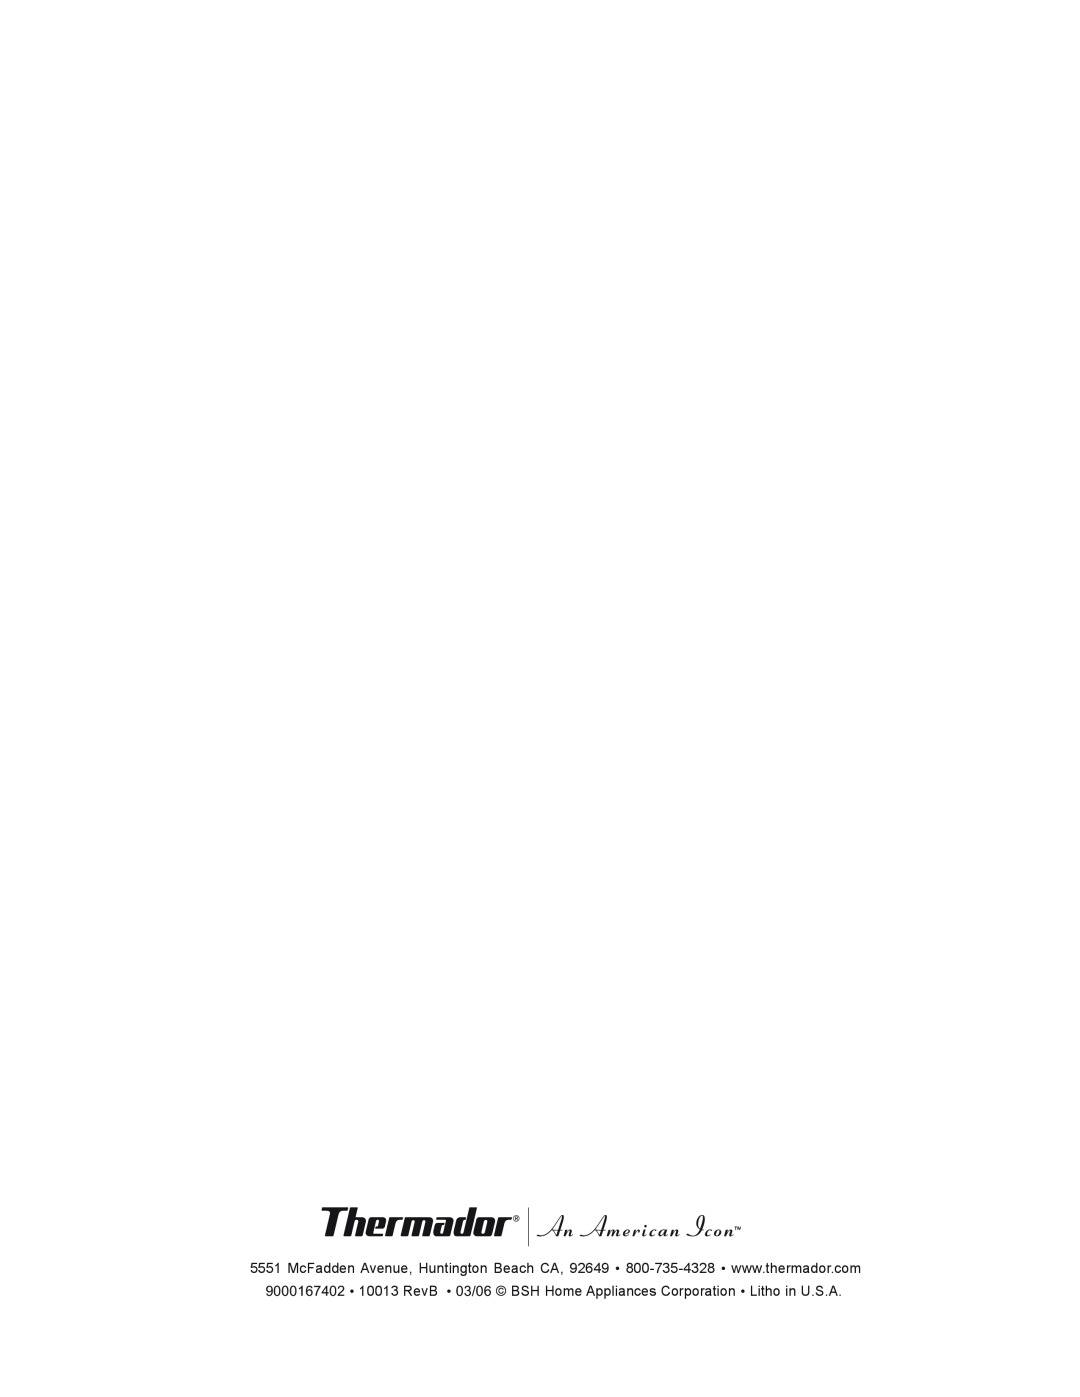 Thermador VCI2 installation manual 